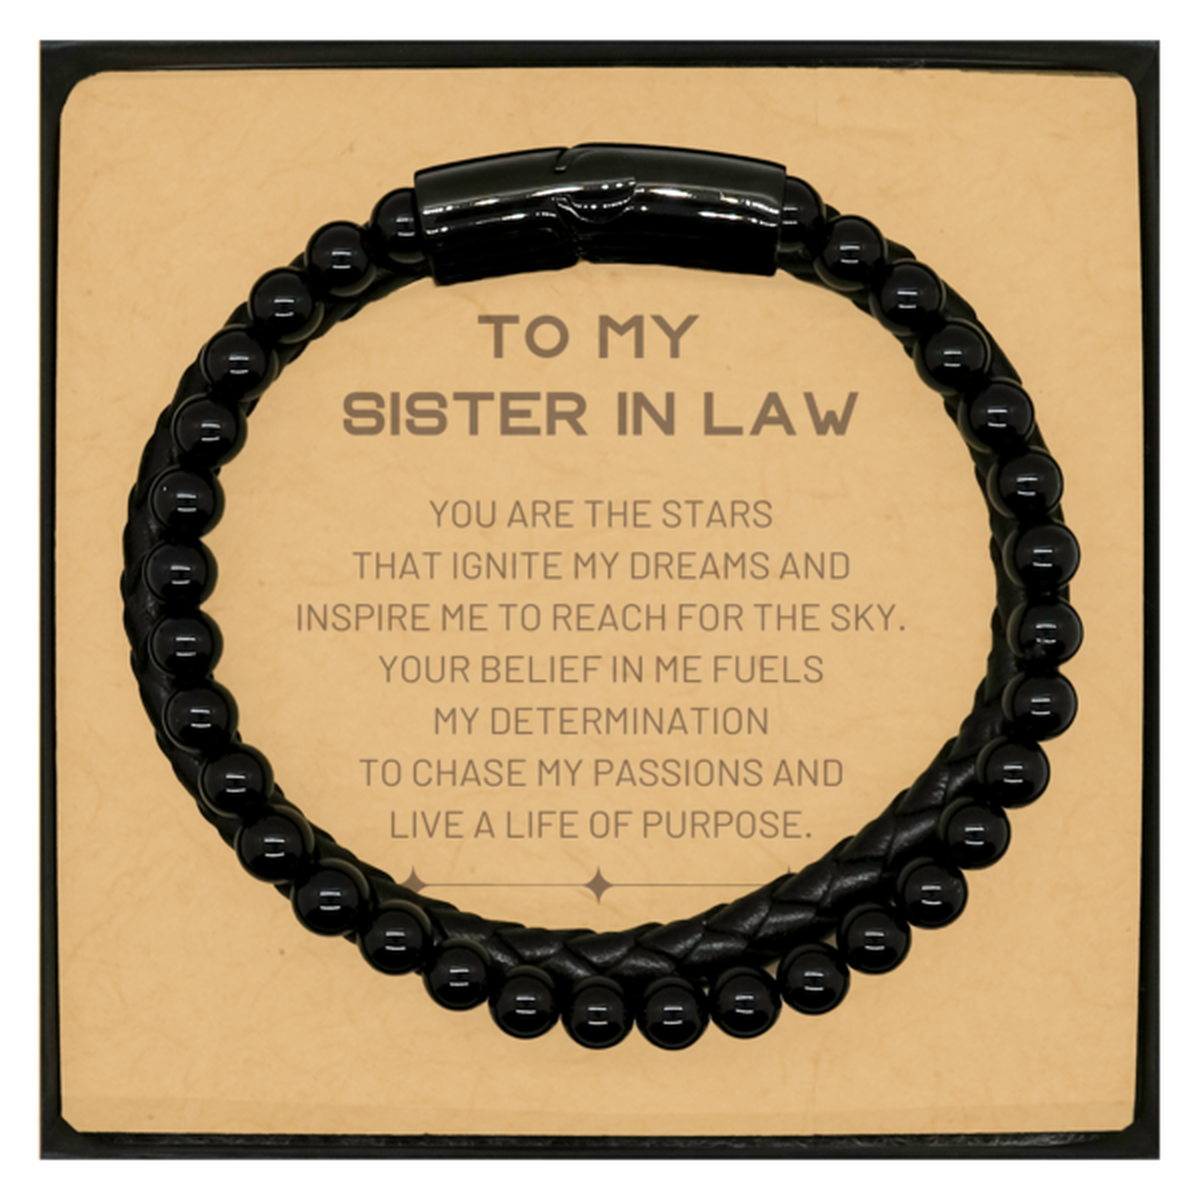 To My Sister In Law Stone Leather Bracelets, You are the stars that ignite my dreams and inspire me to reach for the sky, Birthday Christmas Unique Gifts For Sister In Law, Thank You Gifts For Sister In Law